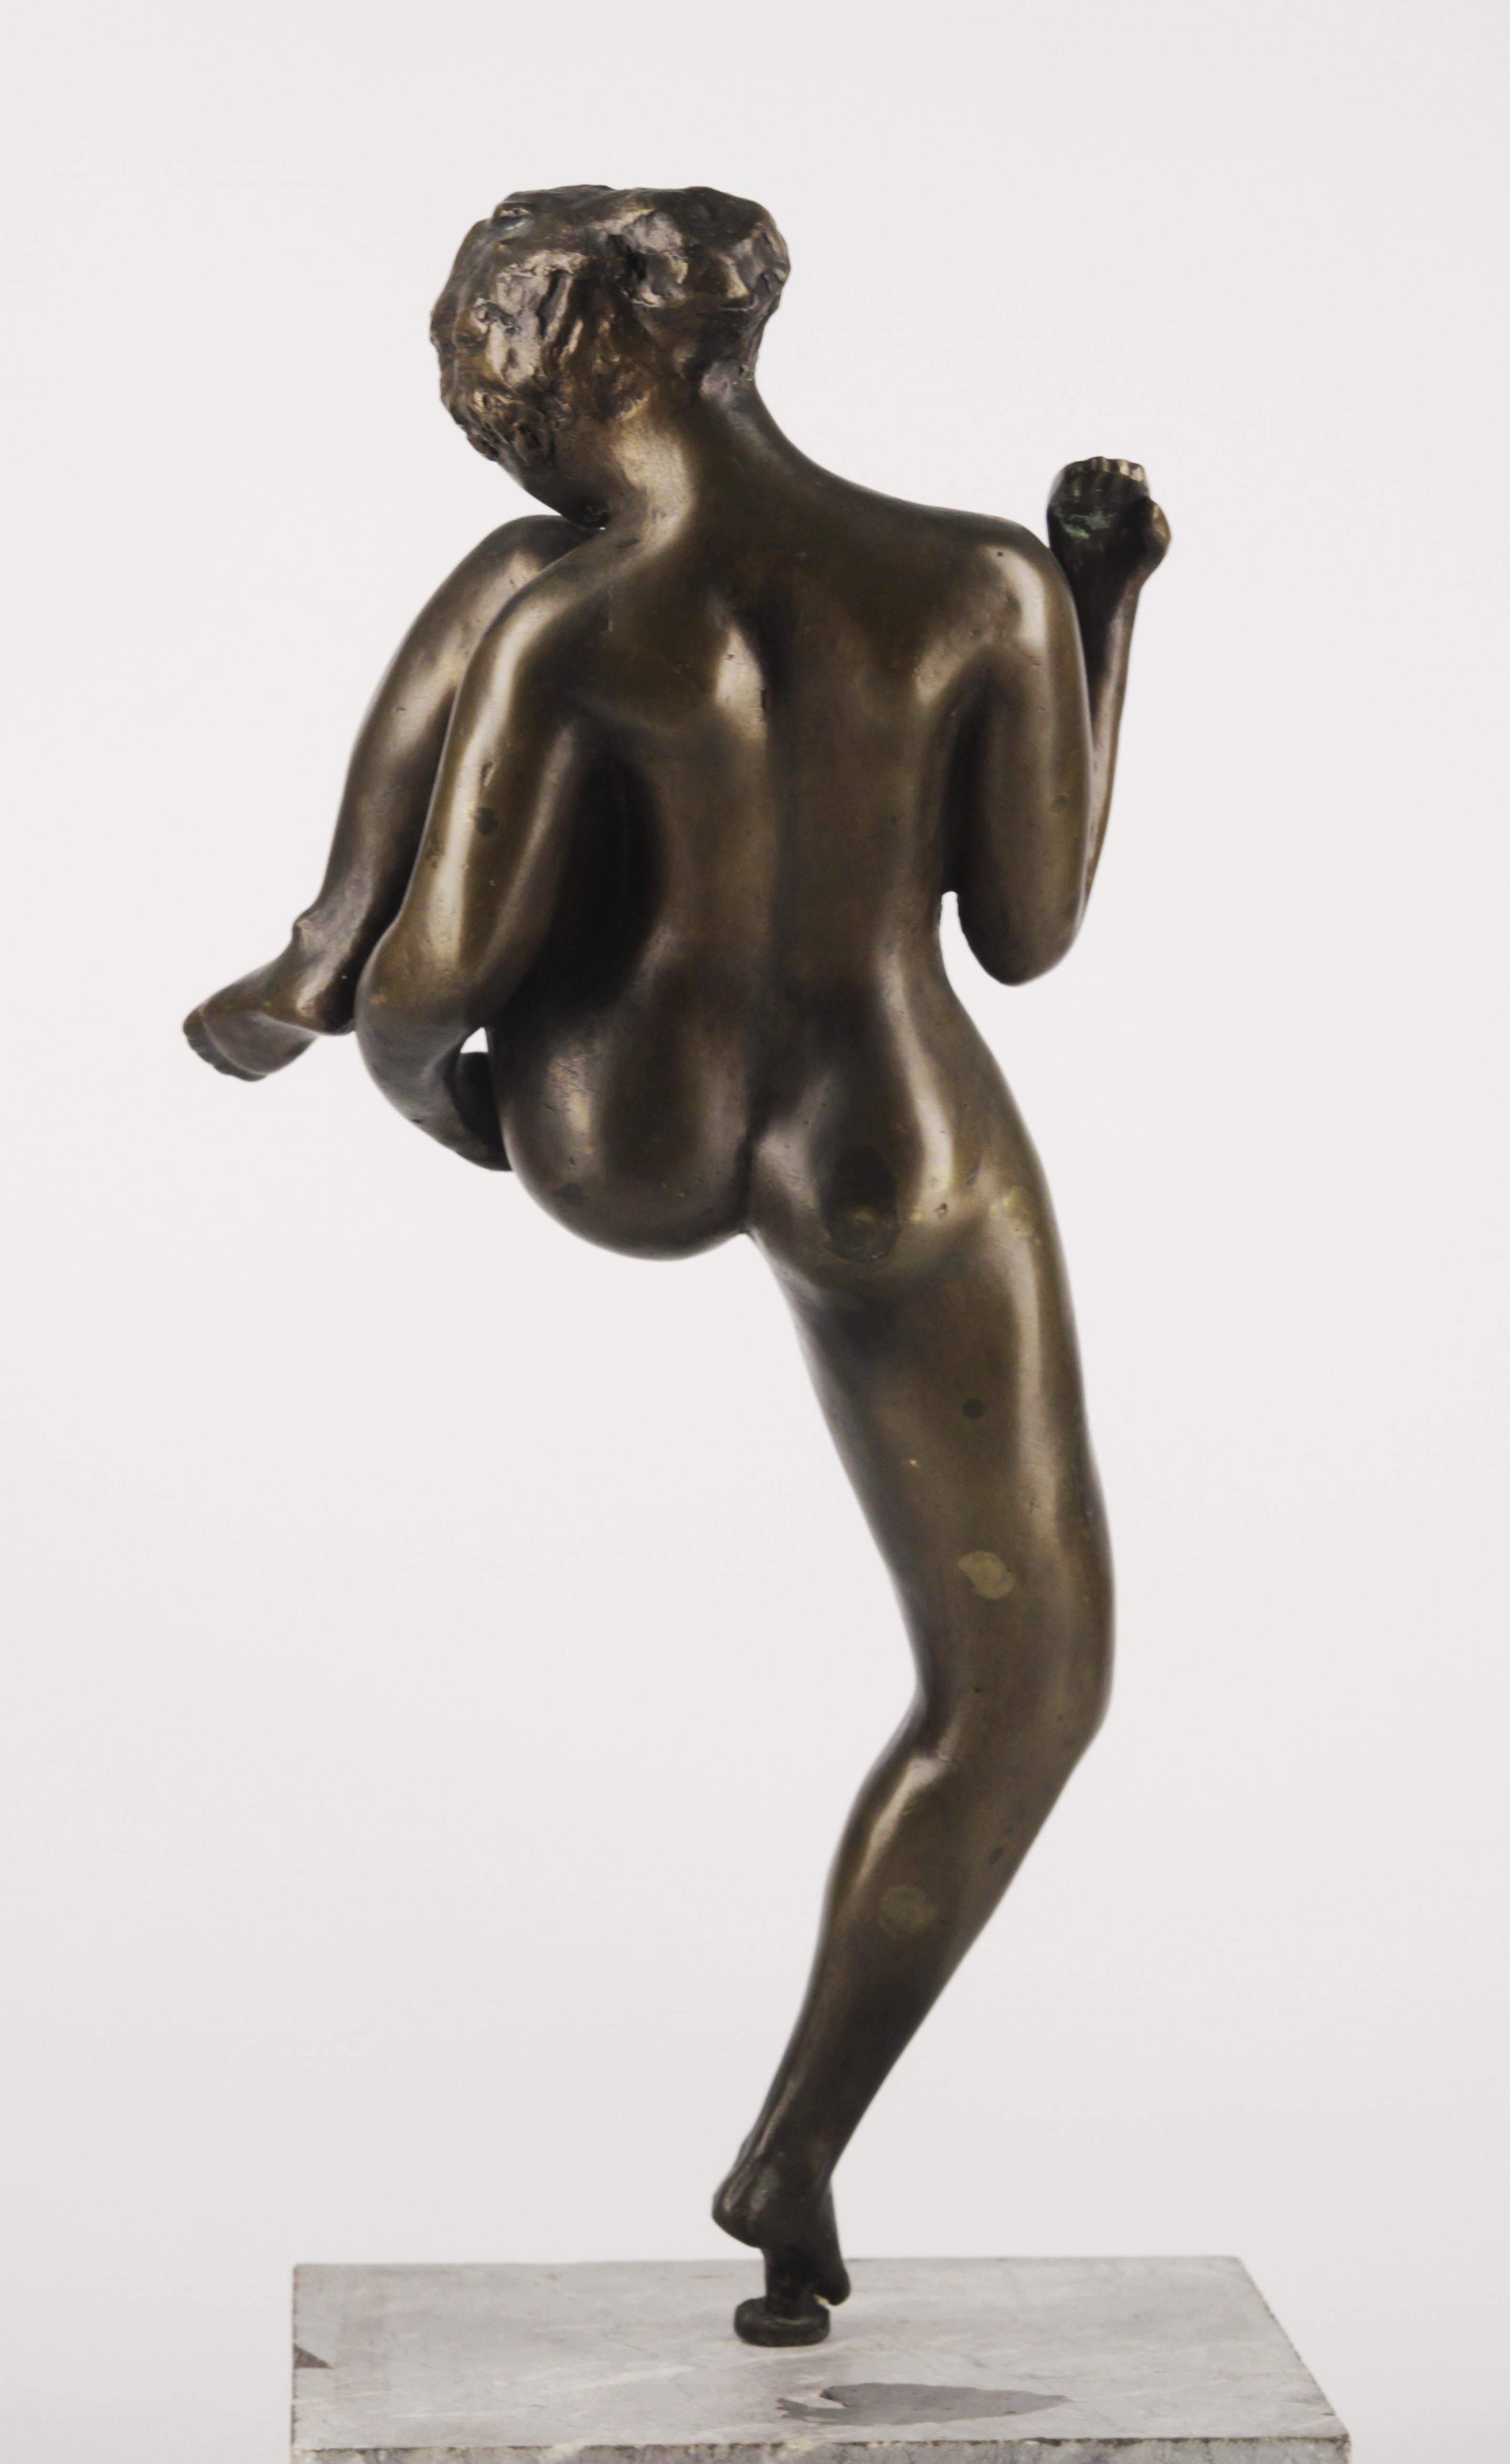 Mid-Century Modern 20th C. Bronze Sculpture of a Nude Woman by Argentine Sculptor J. Mariano Pagés For Sale